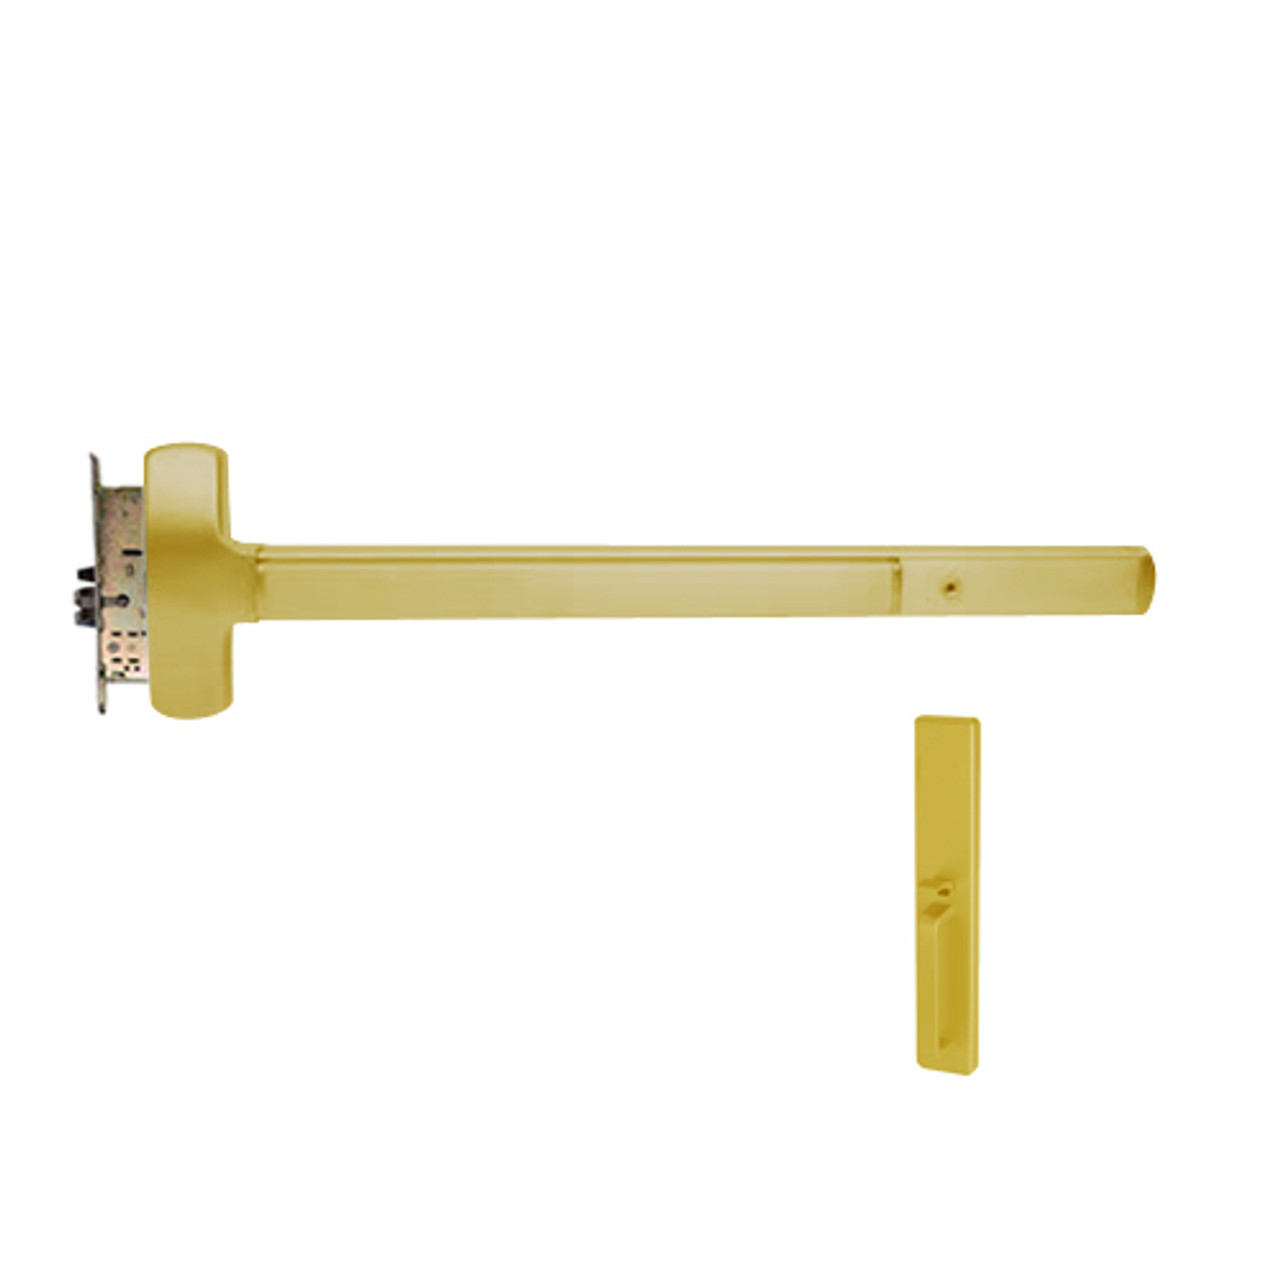 25-M-TP-BE-US3-3-RHR Falcon Exit Device in Polished Brass